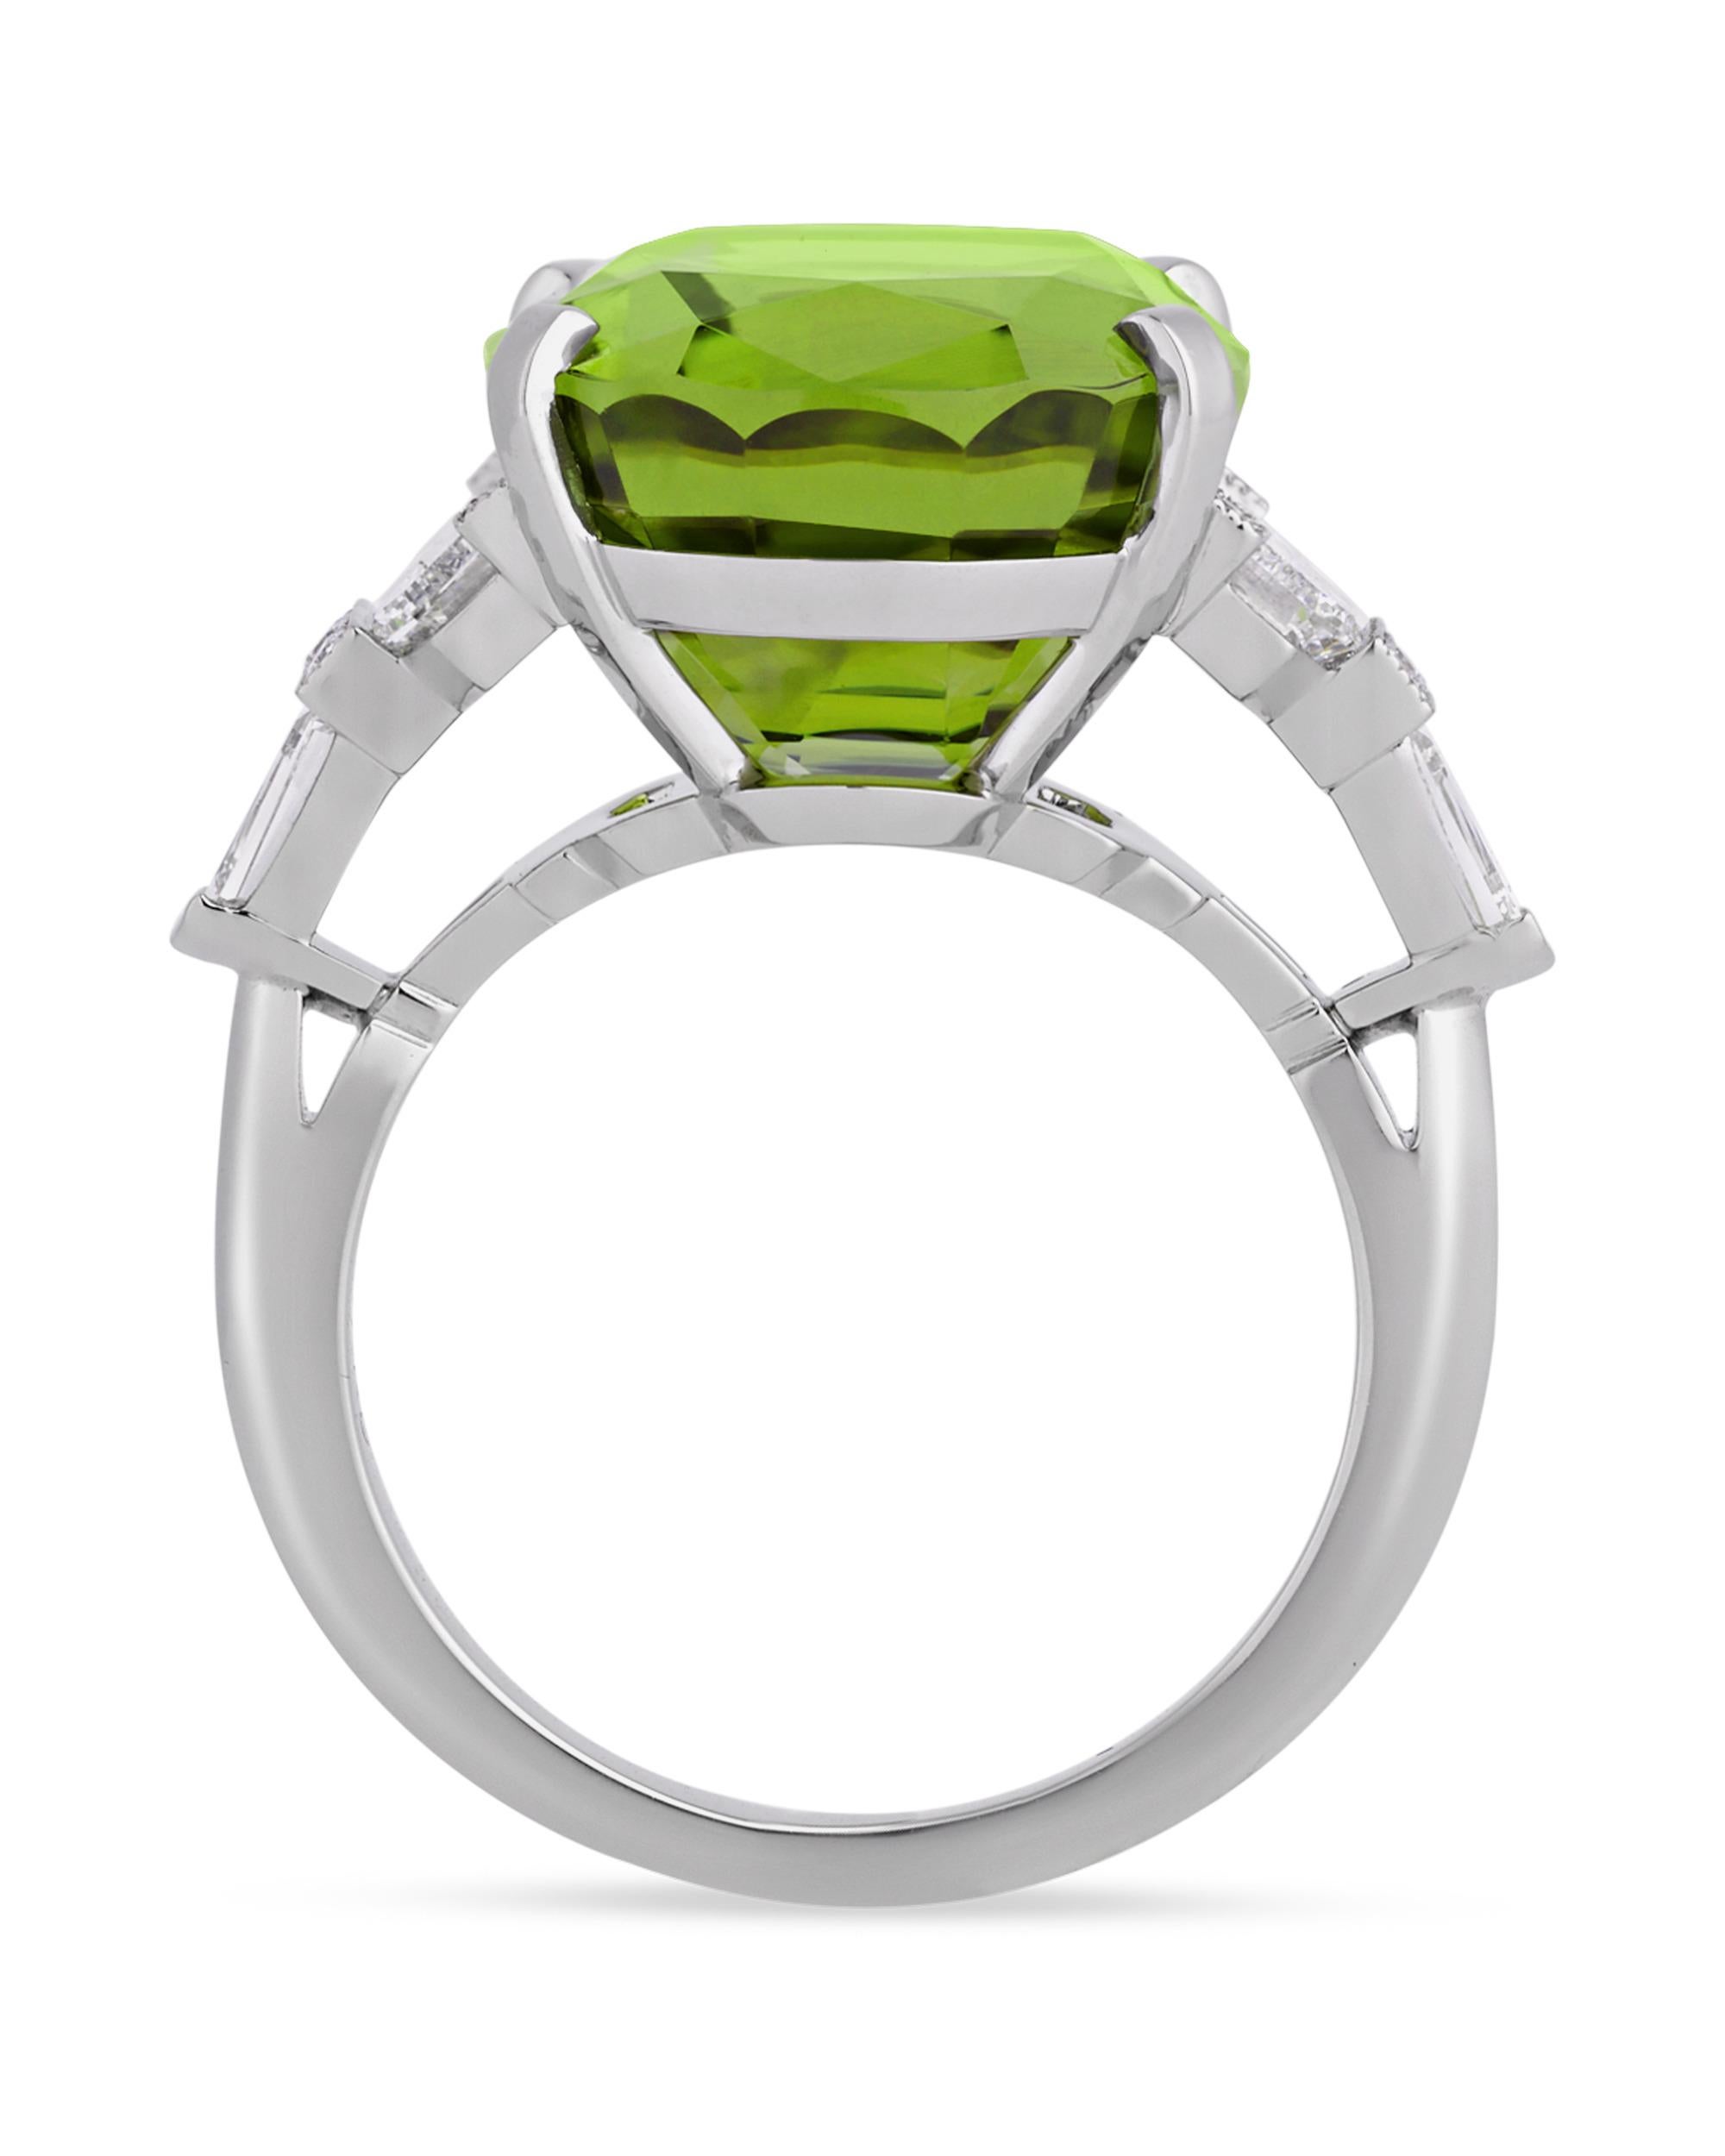 A lush 15.36-carat peridot showcases its unmistakable green hue in this ring from celebrated jeweler Raymond Yard. This brilliant jewel is joined by a myriad of baguette, tapered-bullet and round-cut white diamonds totaling 1.42 carats in its